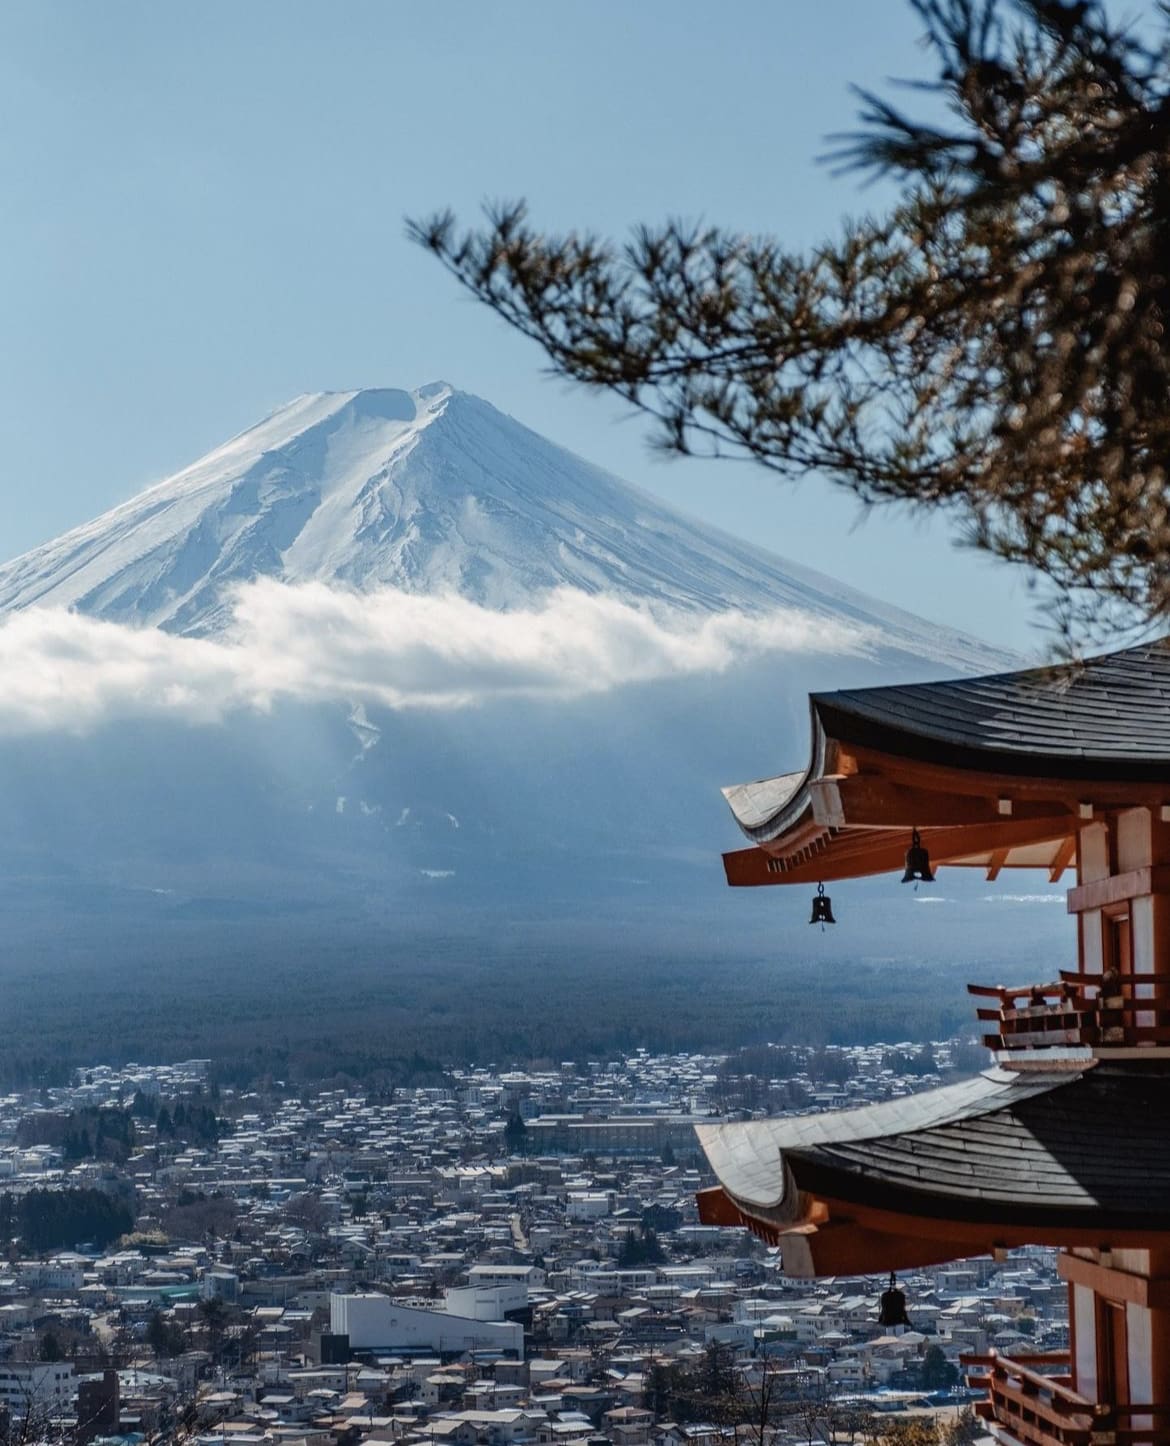 Mount Fuji - 15 Great Places to Visit in Japan